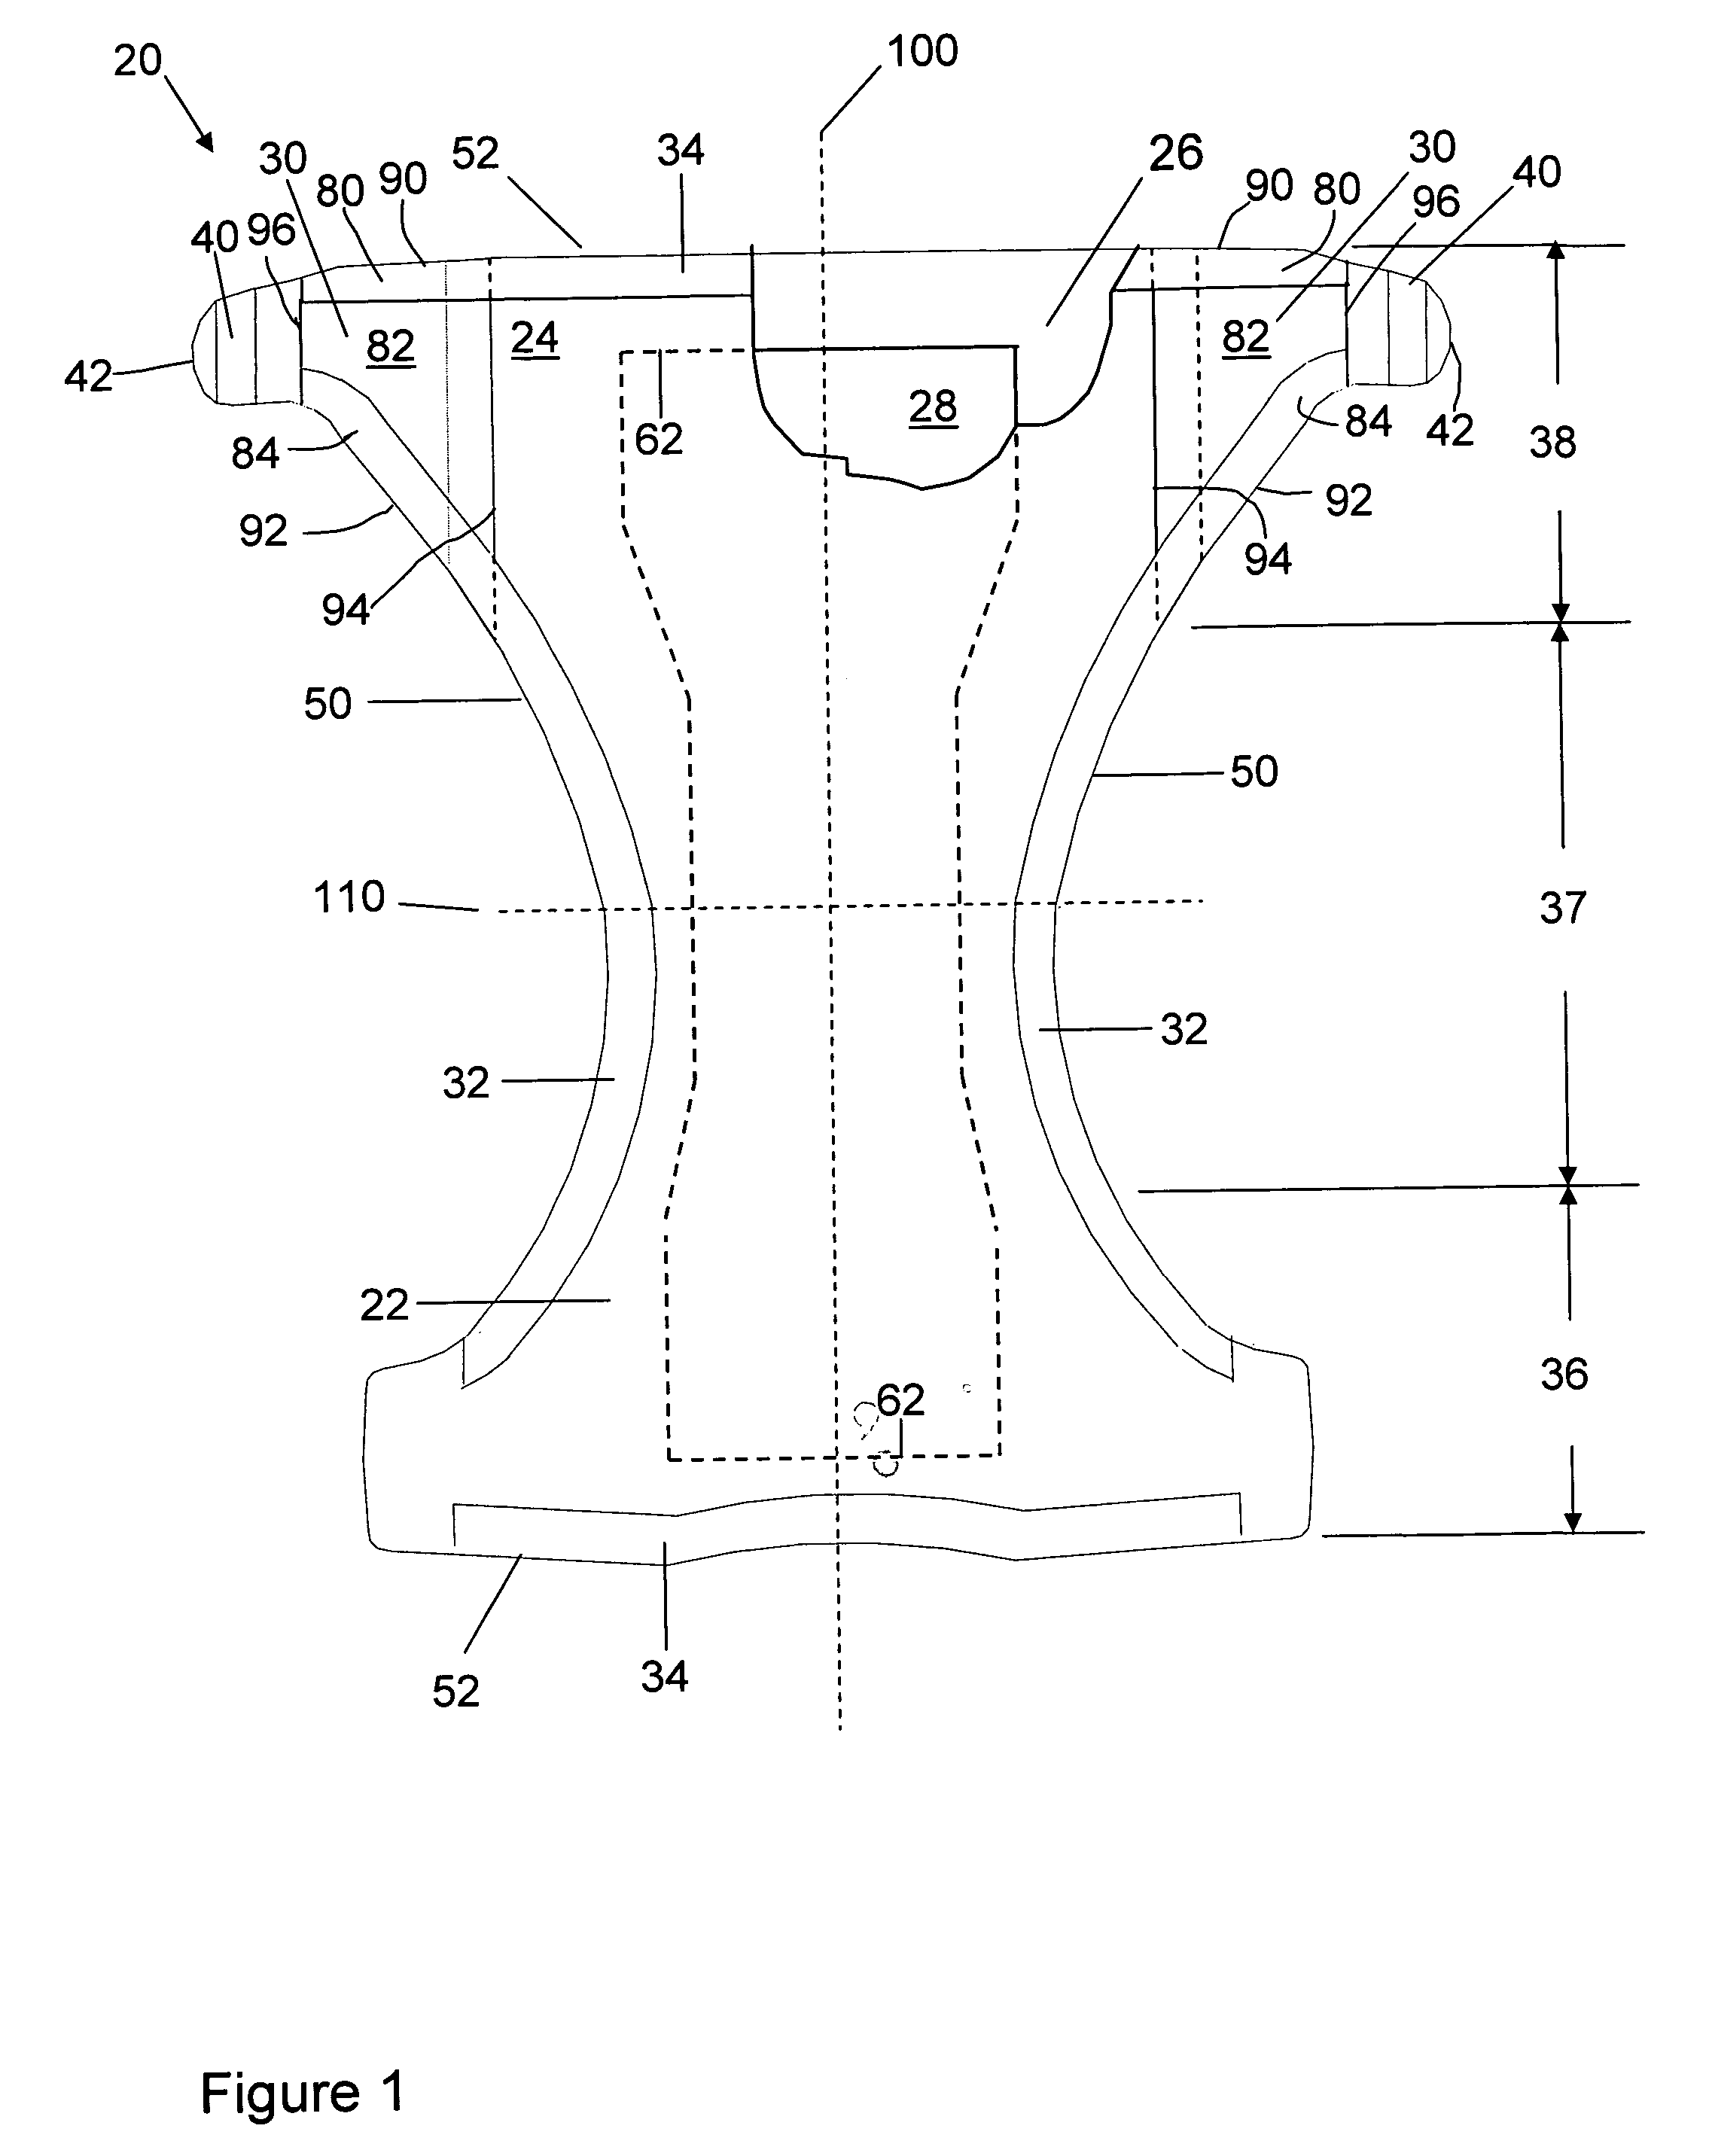 Disposable absorbent article having side panels with structurally, functionally and visually different regions